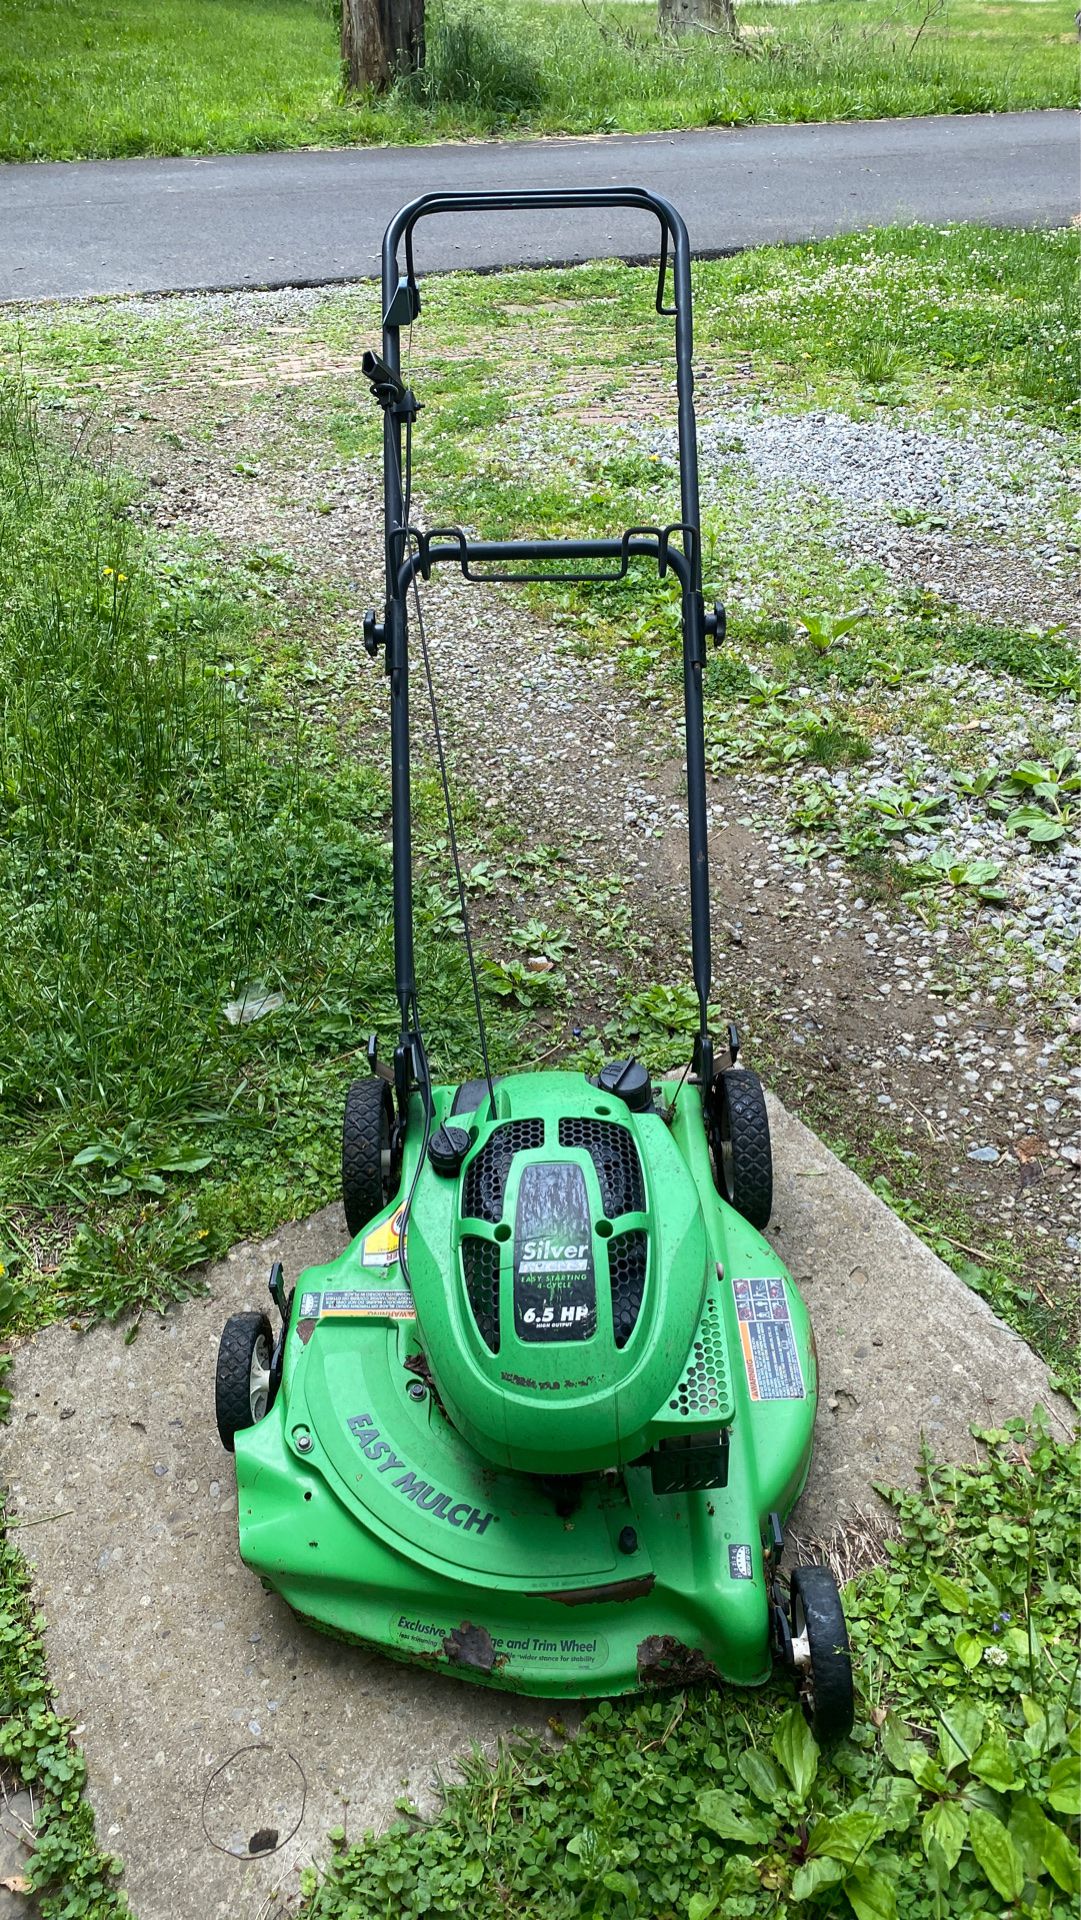 Lawn Mower - needs some work